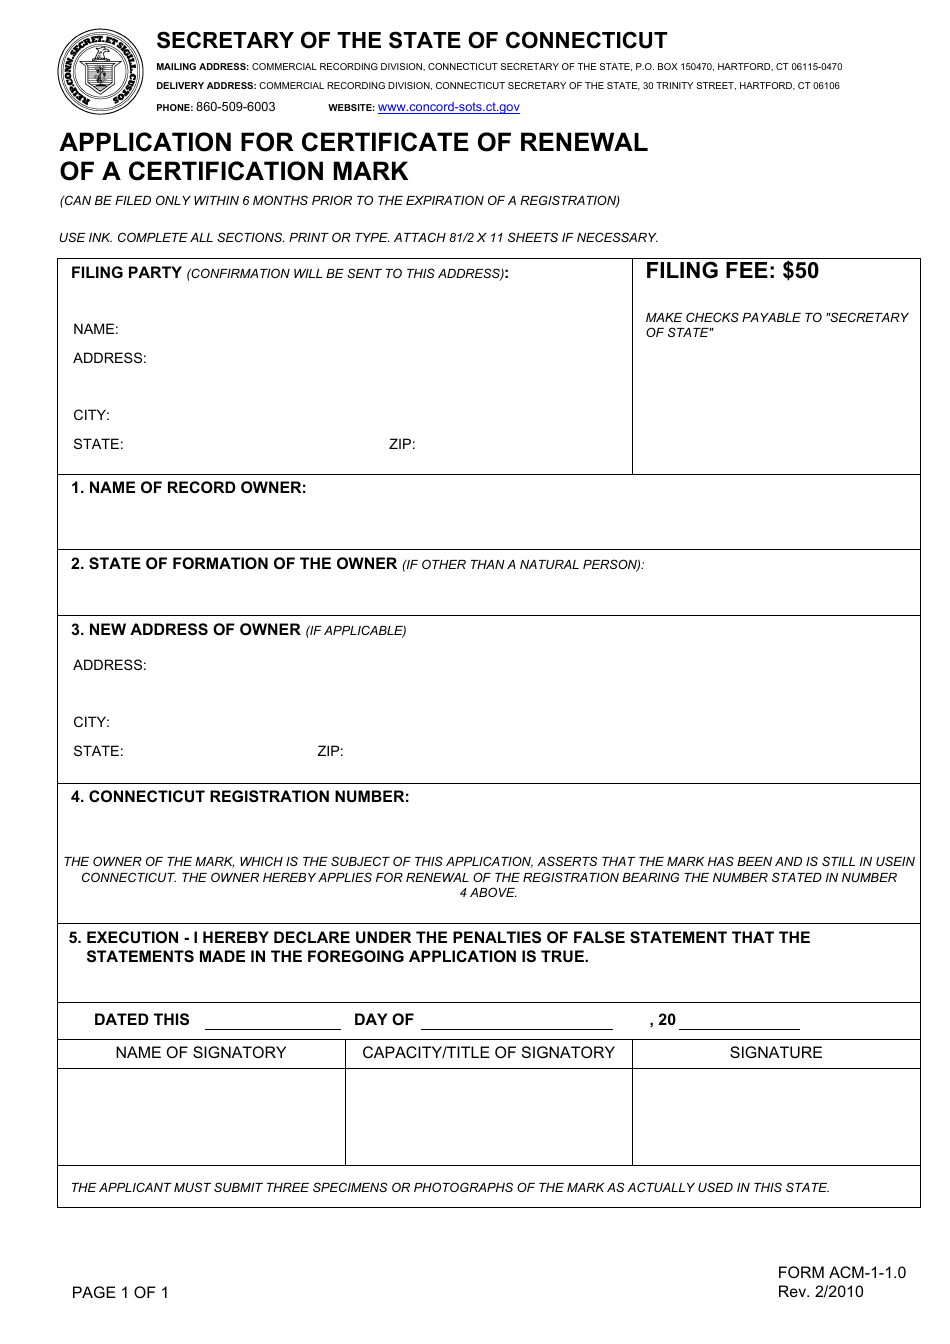 Form ACM-1-1.0 Application for Certificate of Renewal of a Certification Mark - Connecticut, Page 1